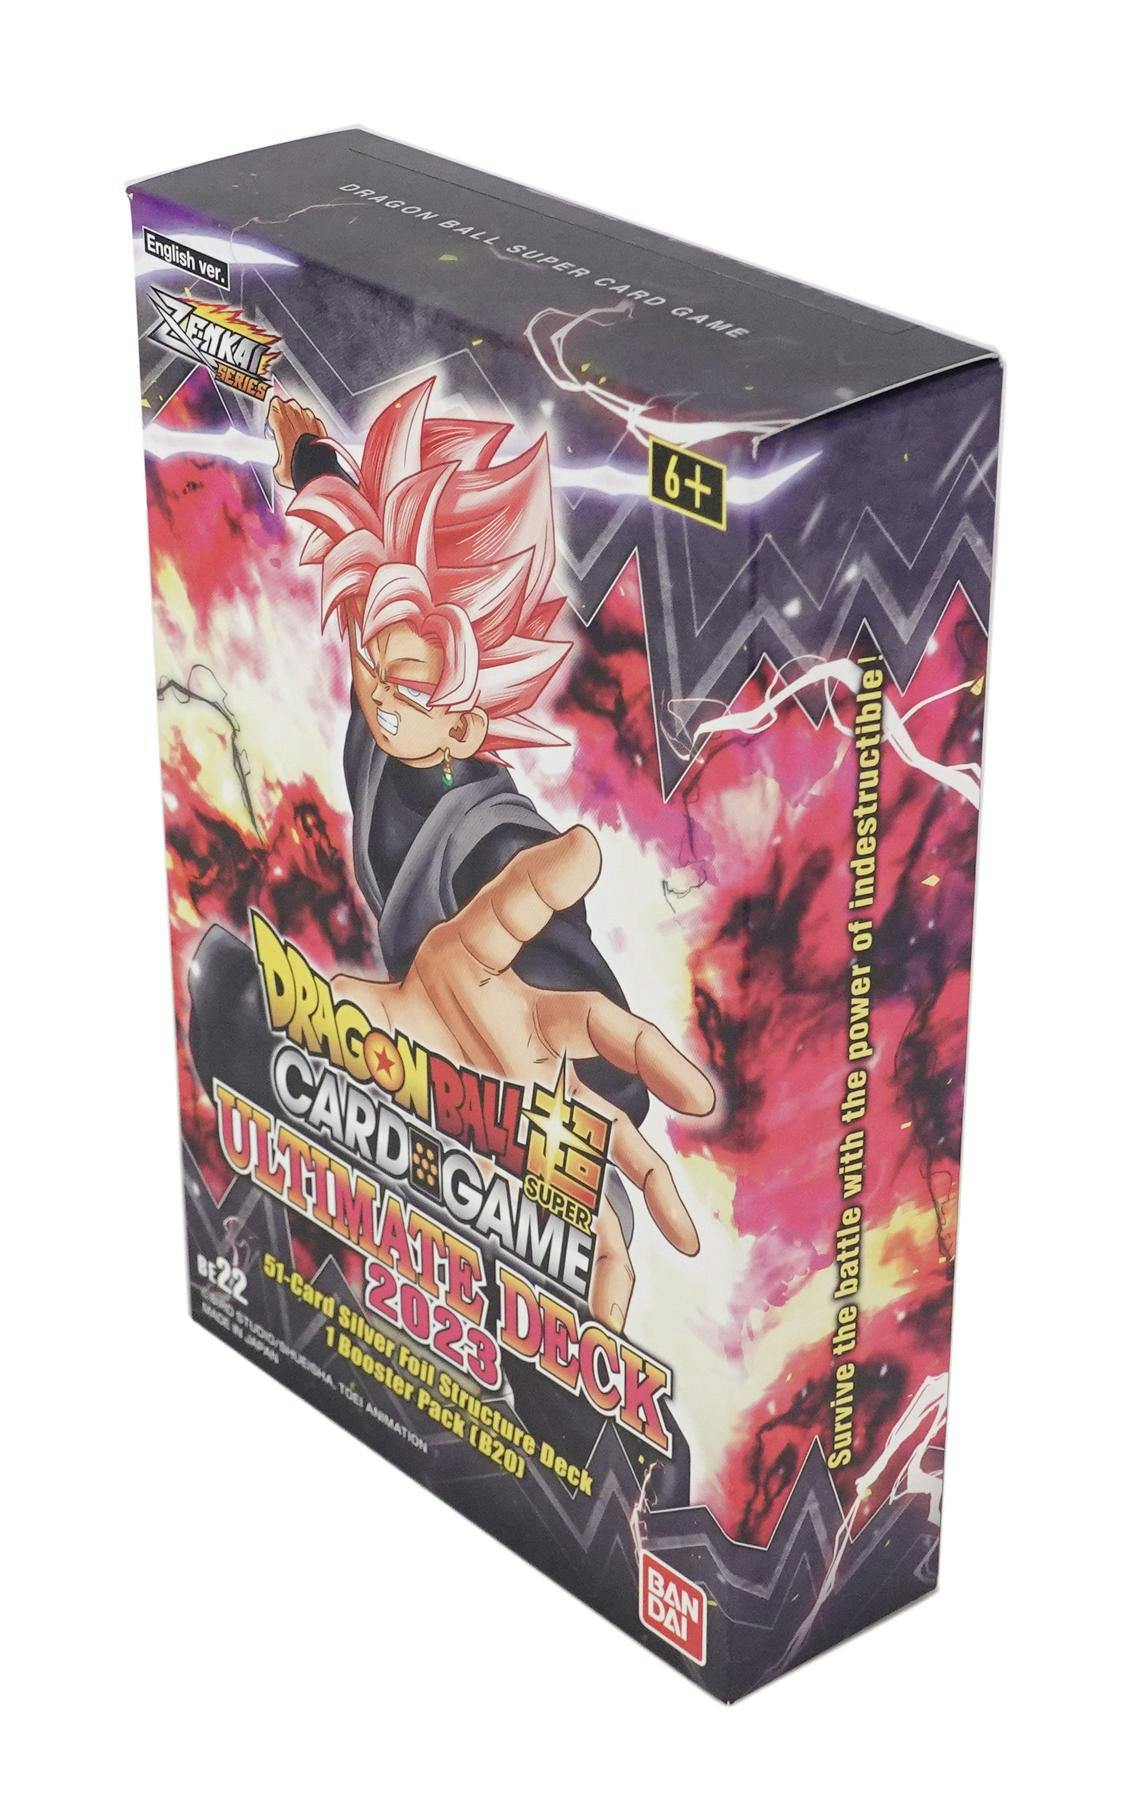 Dragon Ball Super Card Game Ultimate Deck Display 2023 (BE22